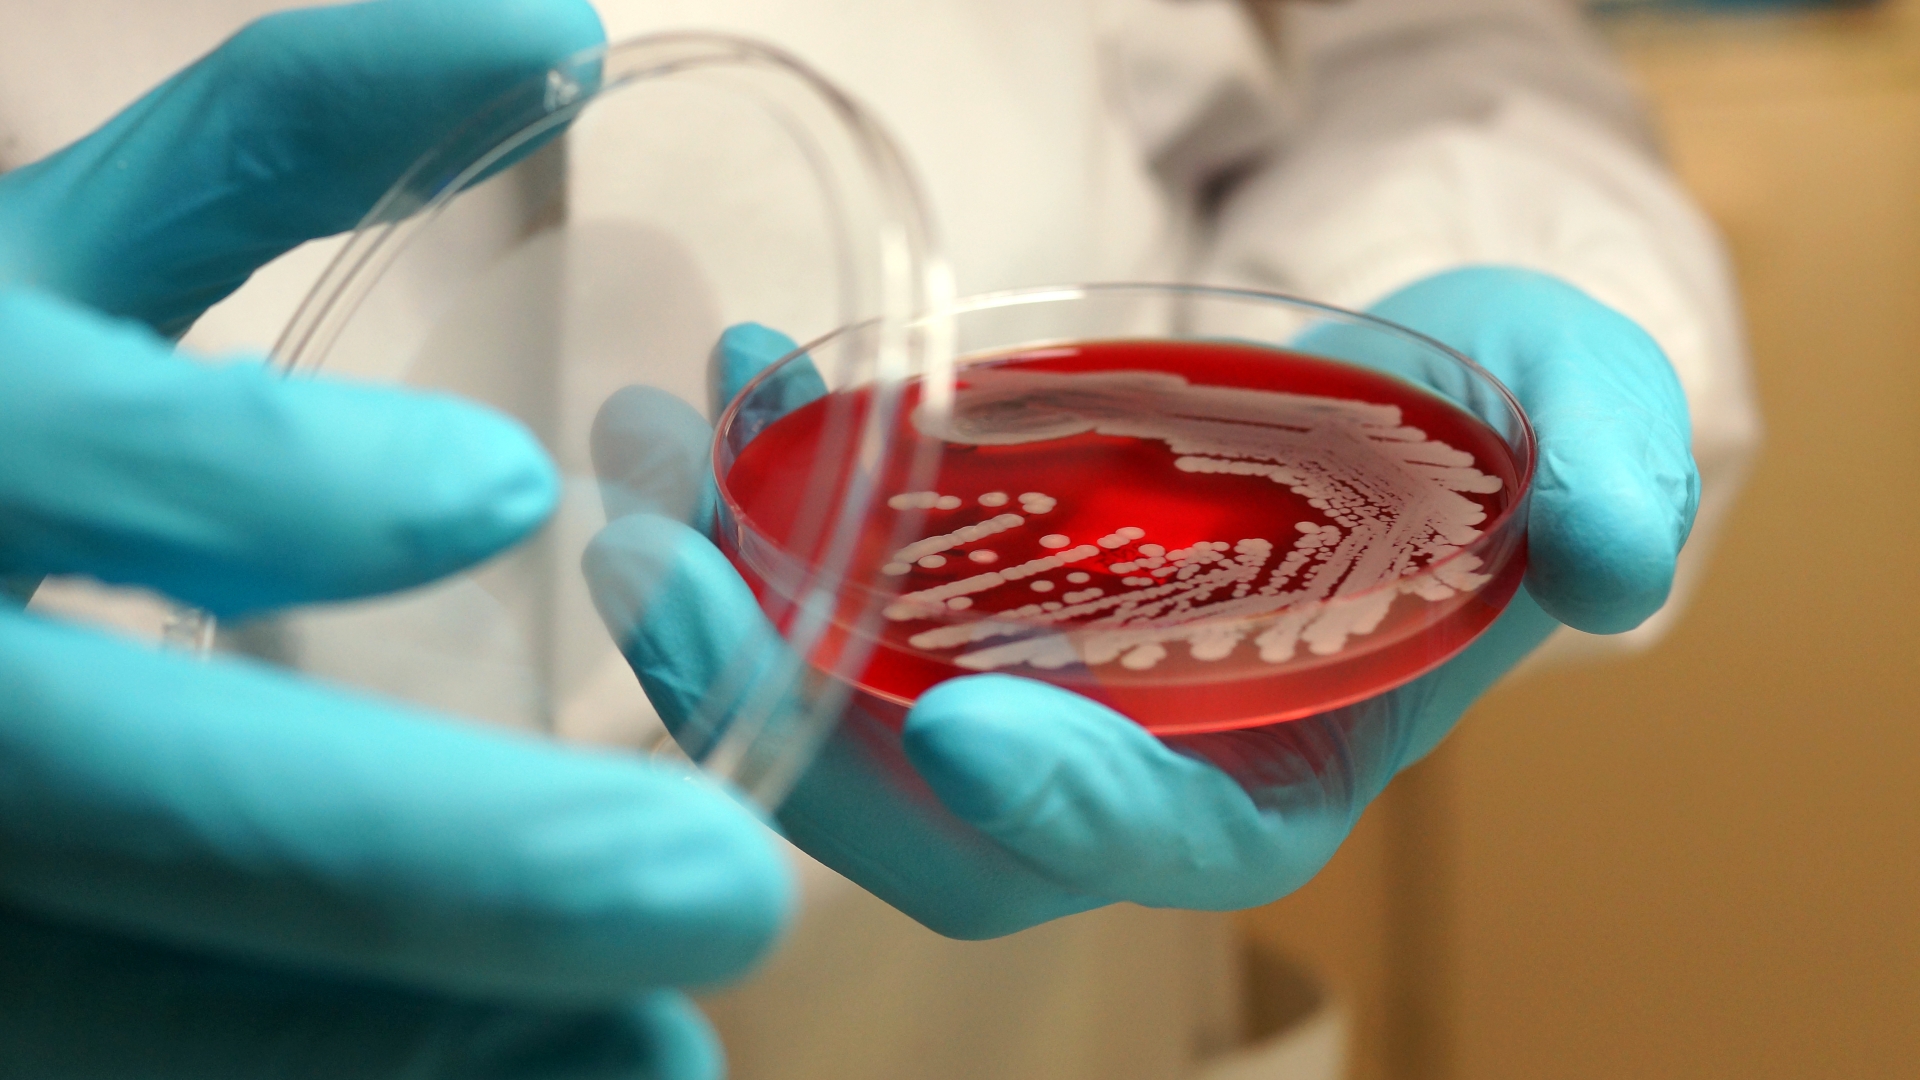 Superbugs could trigger health crisis worse than Covid, experts warn